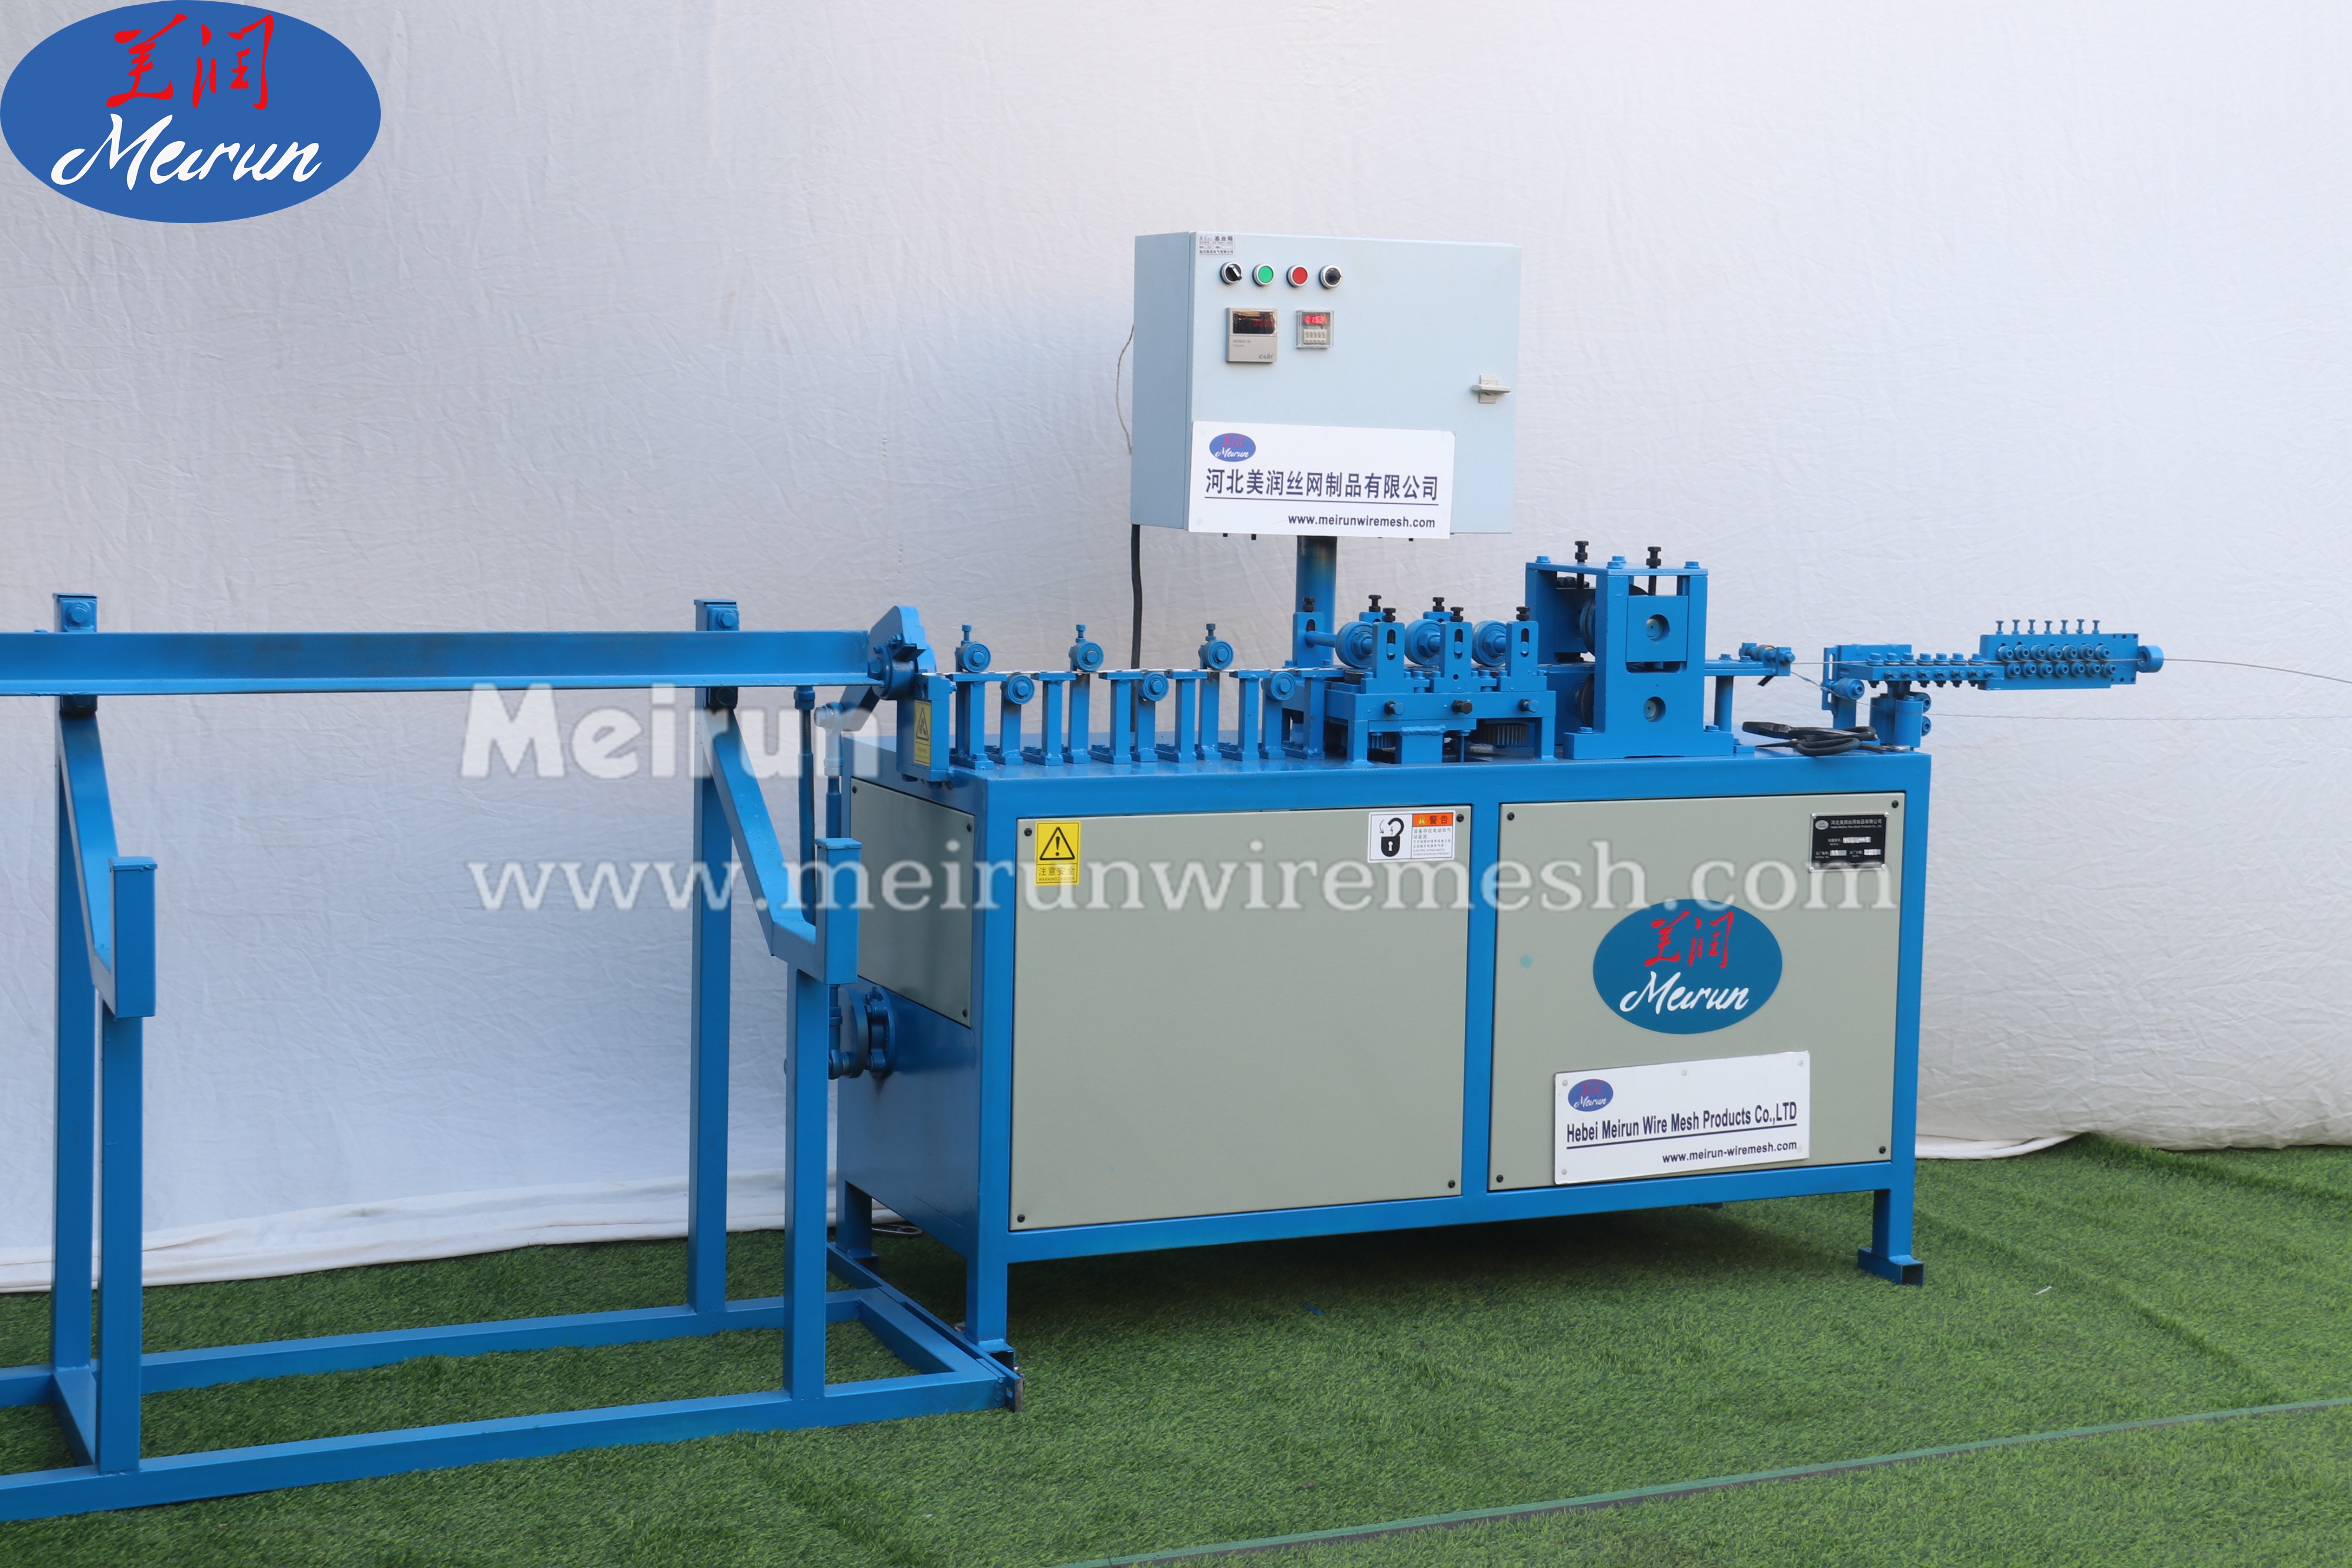 Made in China Razor Barbed Wire Fence Welded Making Machine 